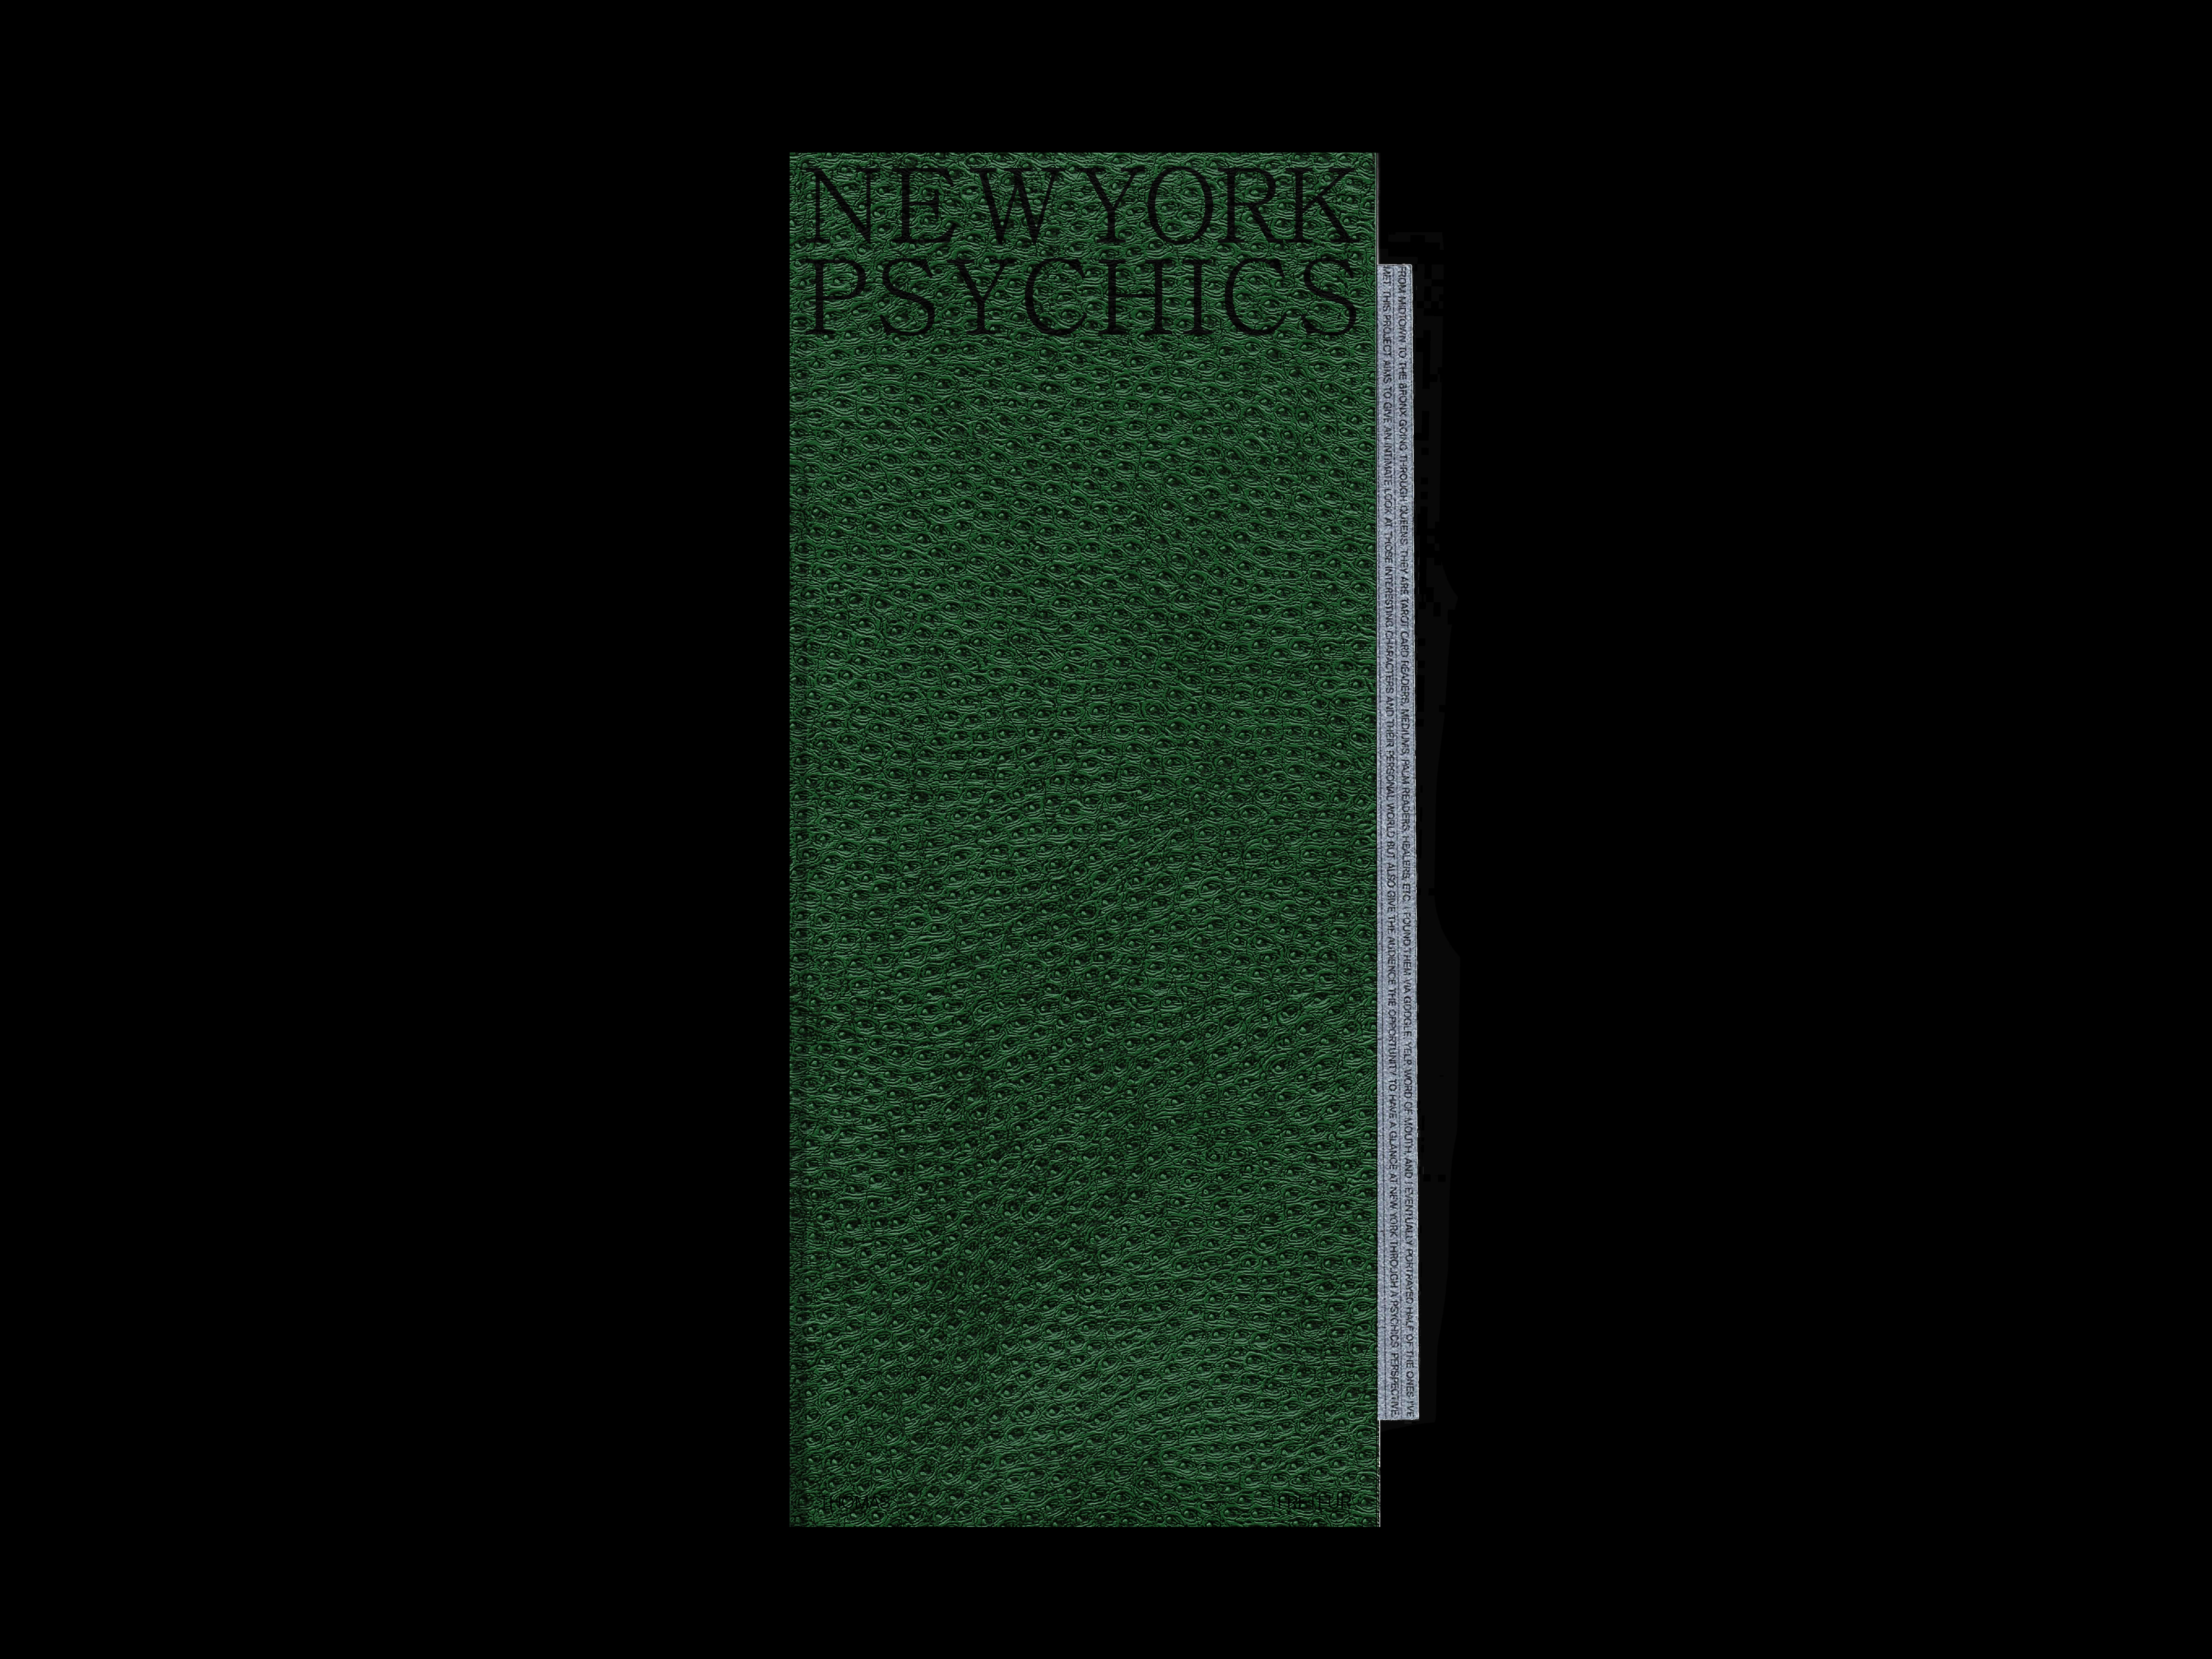 http://julienbaiamonte.com/content/1-projects/new-york-psychics/nyc_psychics_scan004_baiamonte_251019.png.png